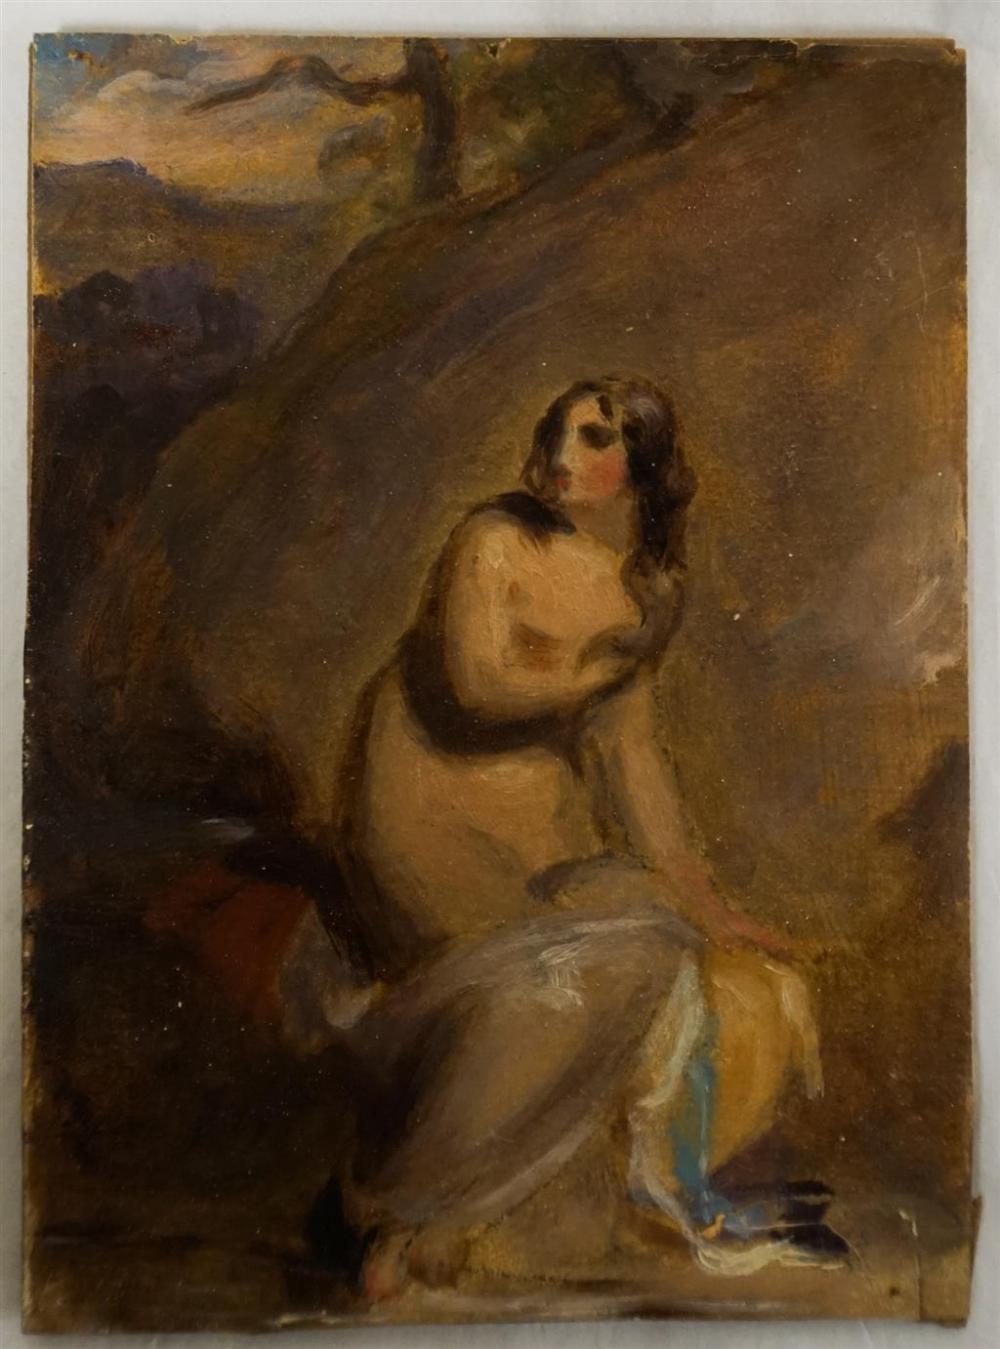 ATTRIBUTED TO THOMAS SULLY (AMERICAN